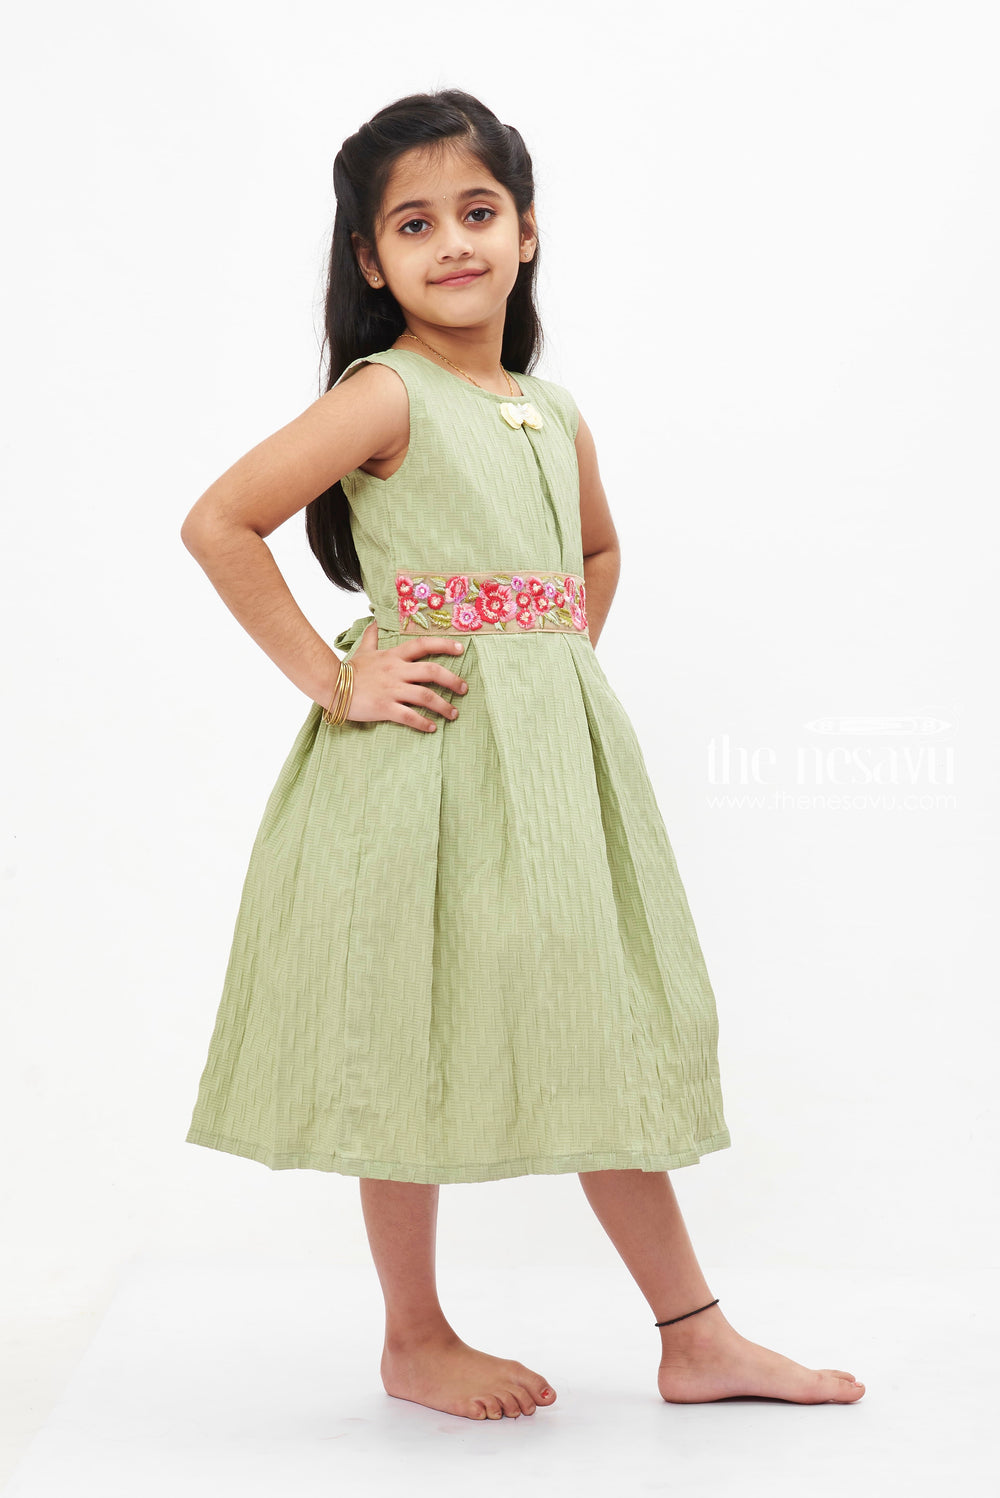 The Nesavu Girls Fancy Frock Sage Elegance Pleated Cotton Dress: Serene Green with Delicate Collar for Girls Nesavu Girls' Sage Green Pleated Dress | Cotton Collar Frock for Kids | The Nesavu